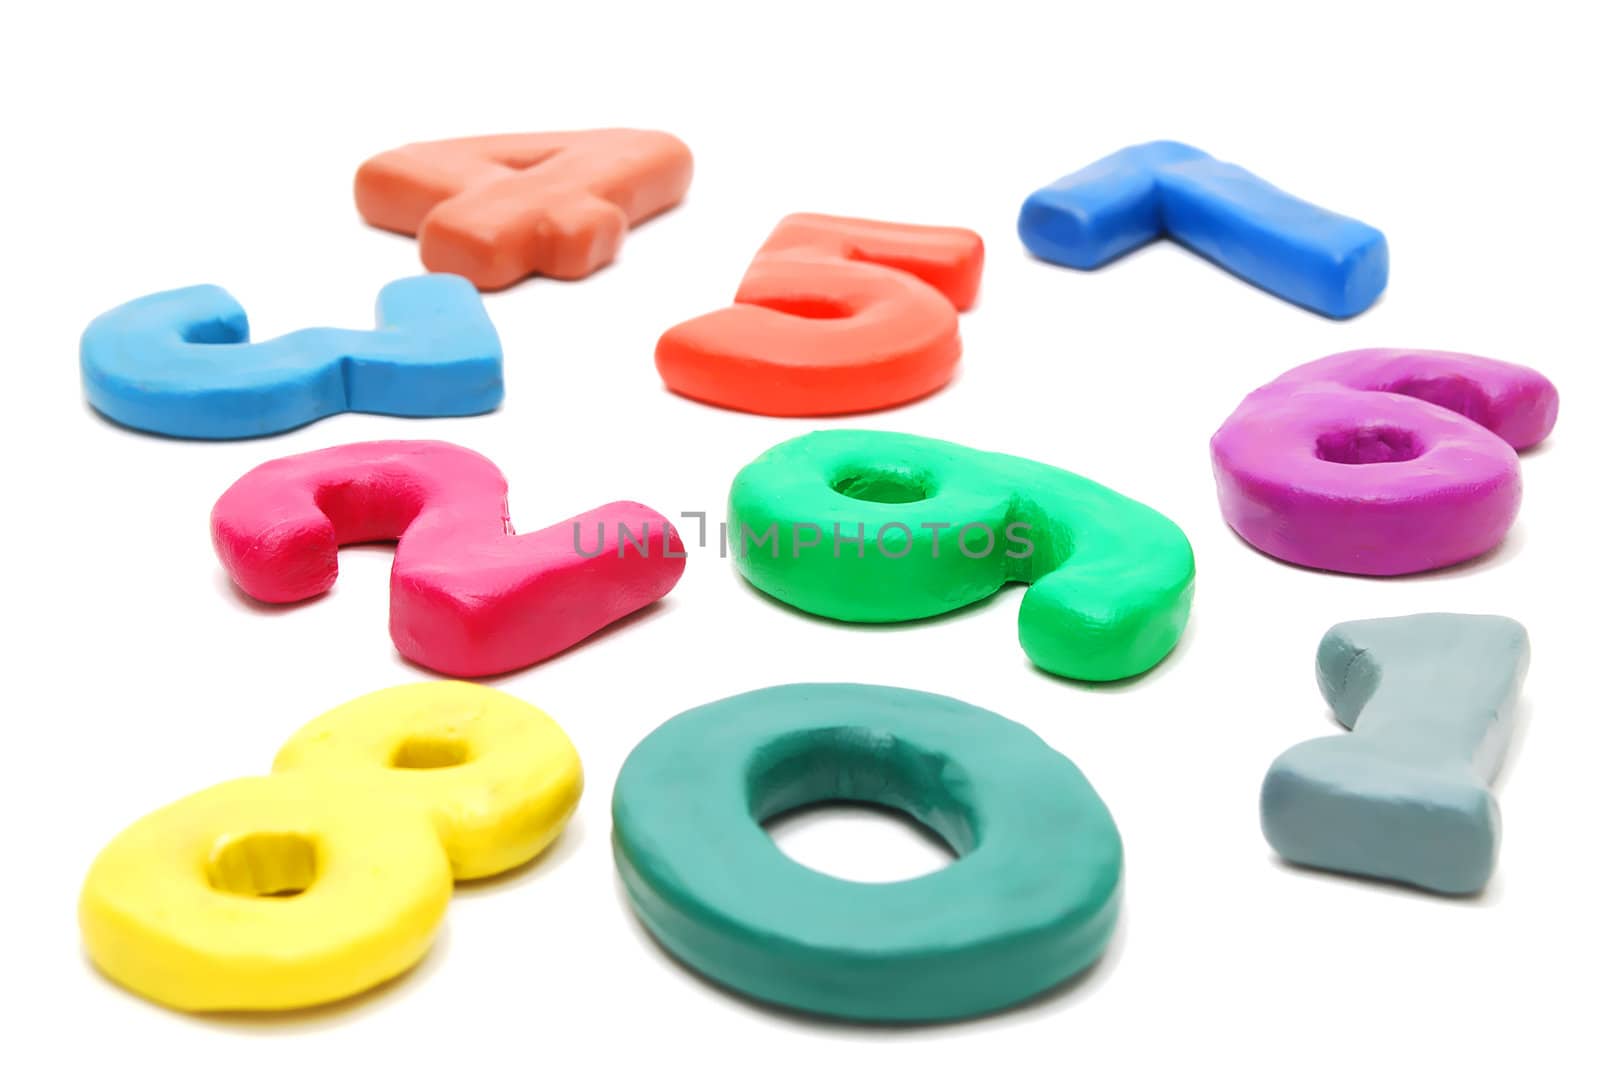 3d Colored Digits Made of Plasticine Laing Random Isolated on White Background